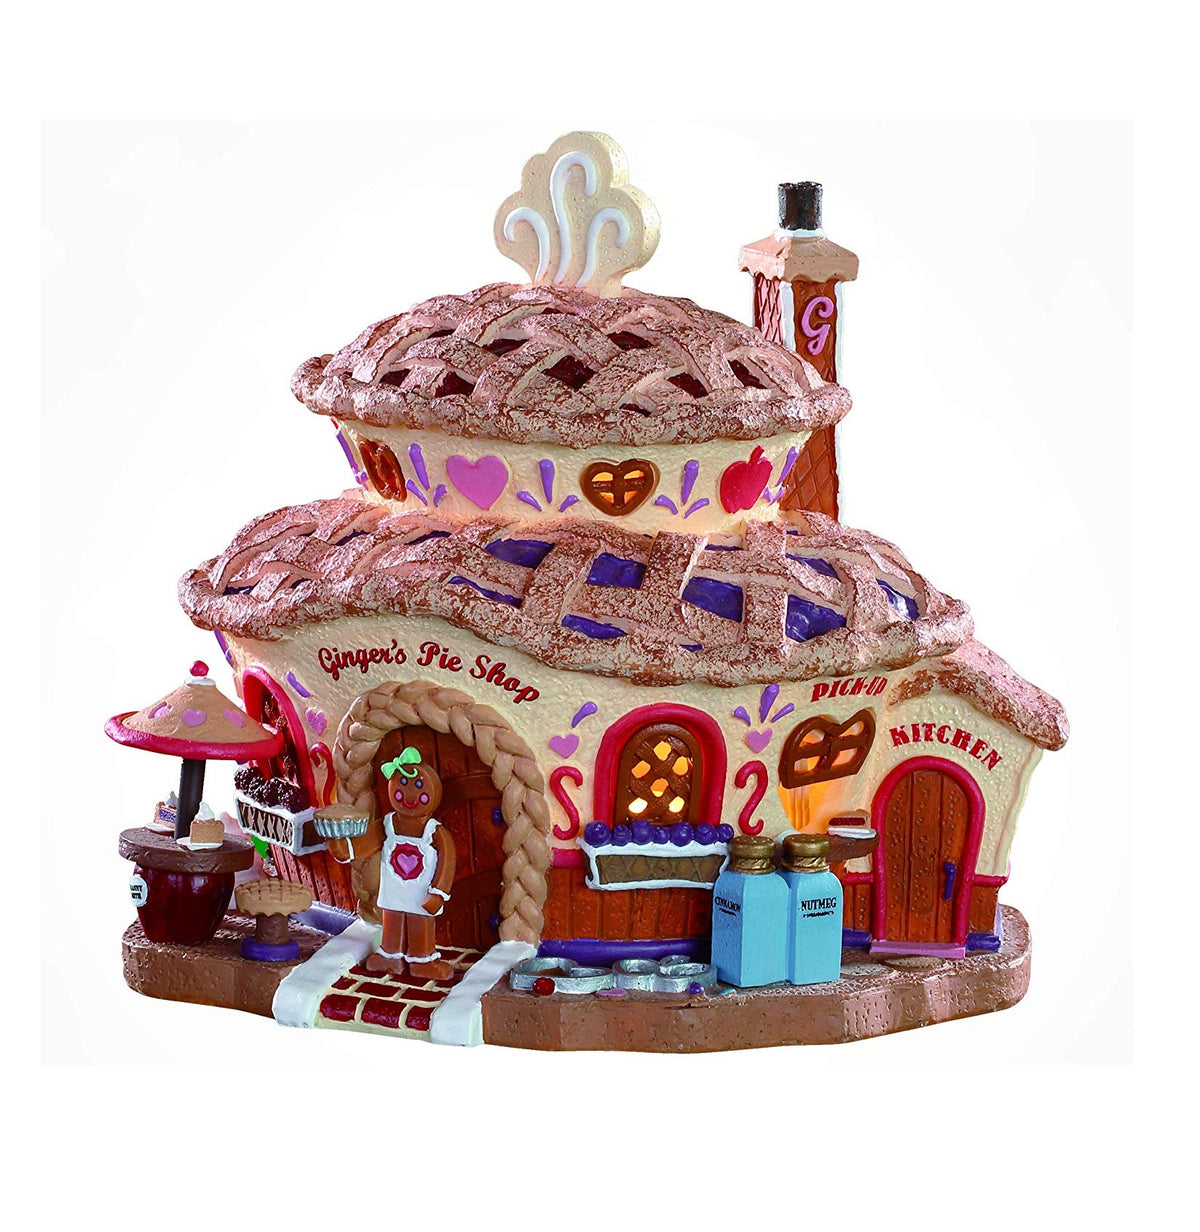 Lemax 85437 Ginger's Pie Shop Tabletop Christmas Decoration, Multicolored